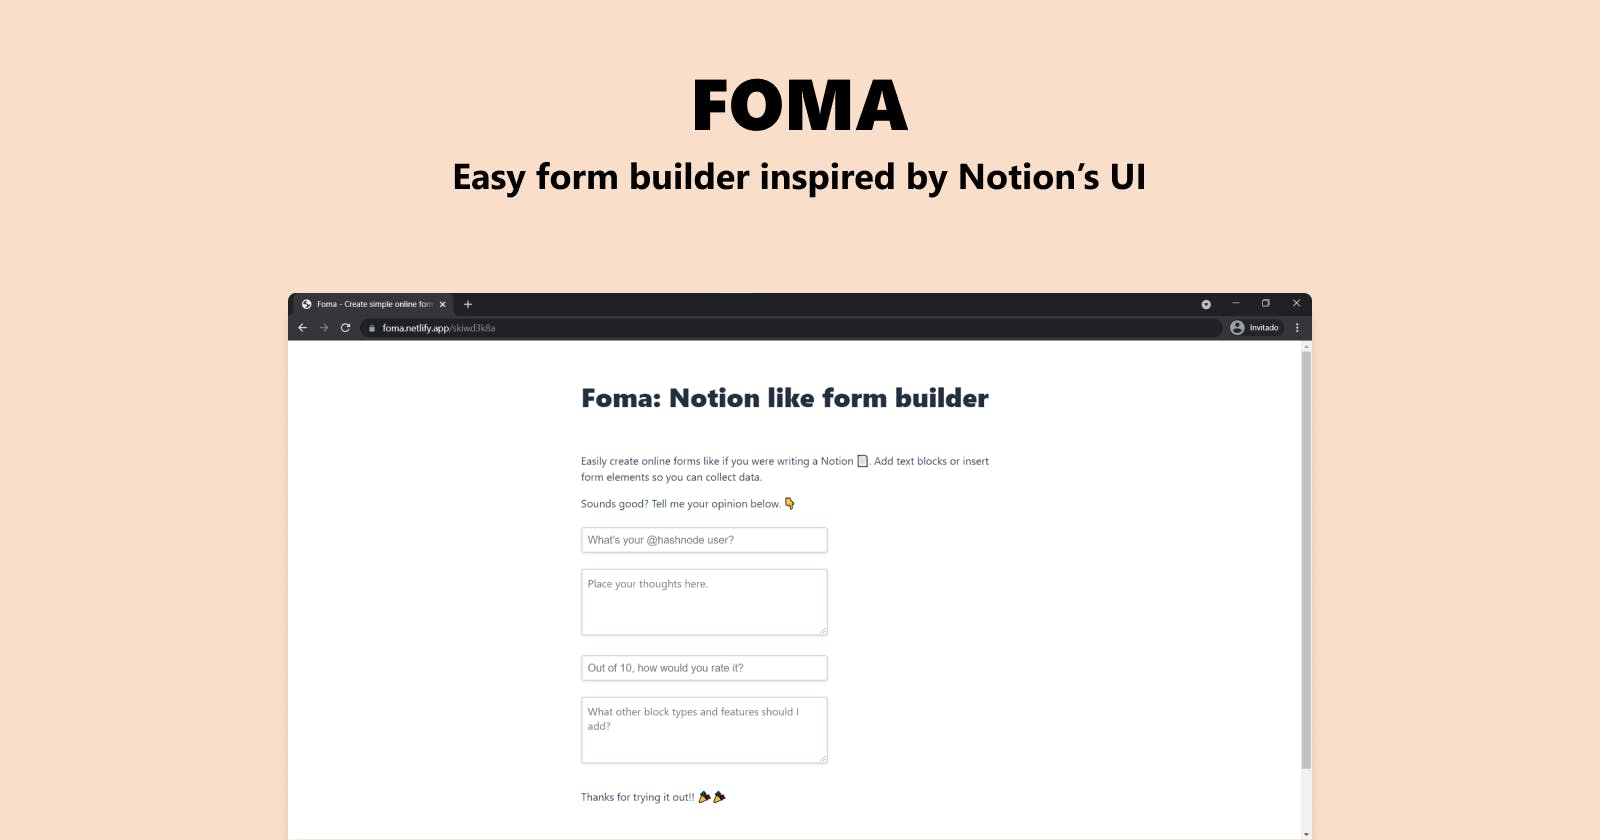 Introducing FOMA, a block powered form builder inspired by Notion UI